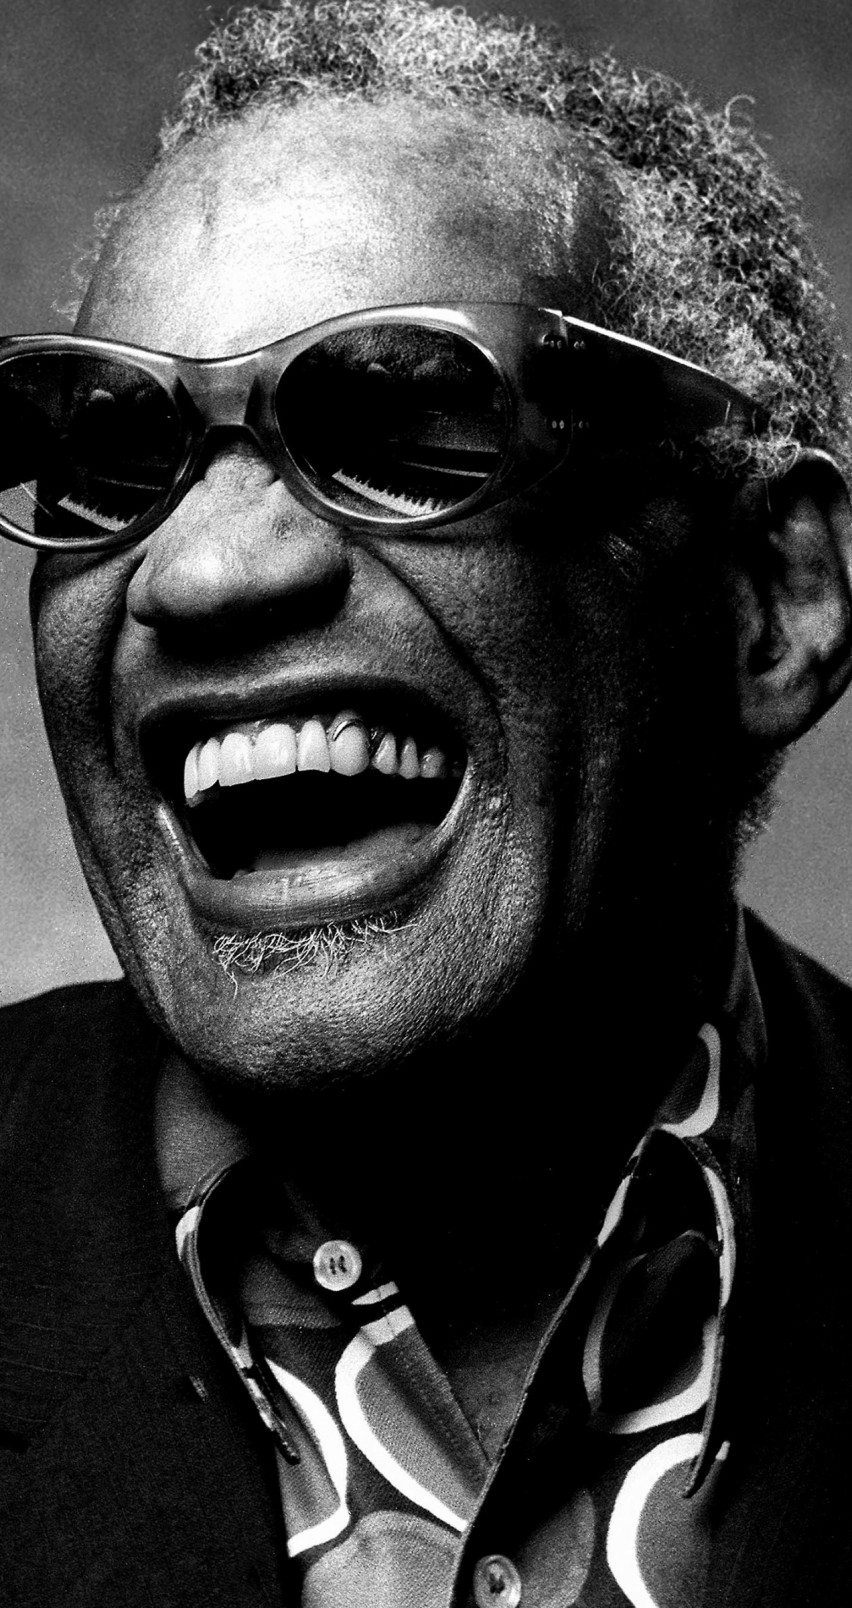 Ray Charles Portrait in Black & White Wallpaper for Apple iPhone 6 / 6s